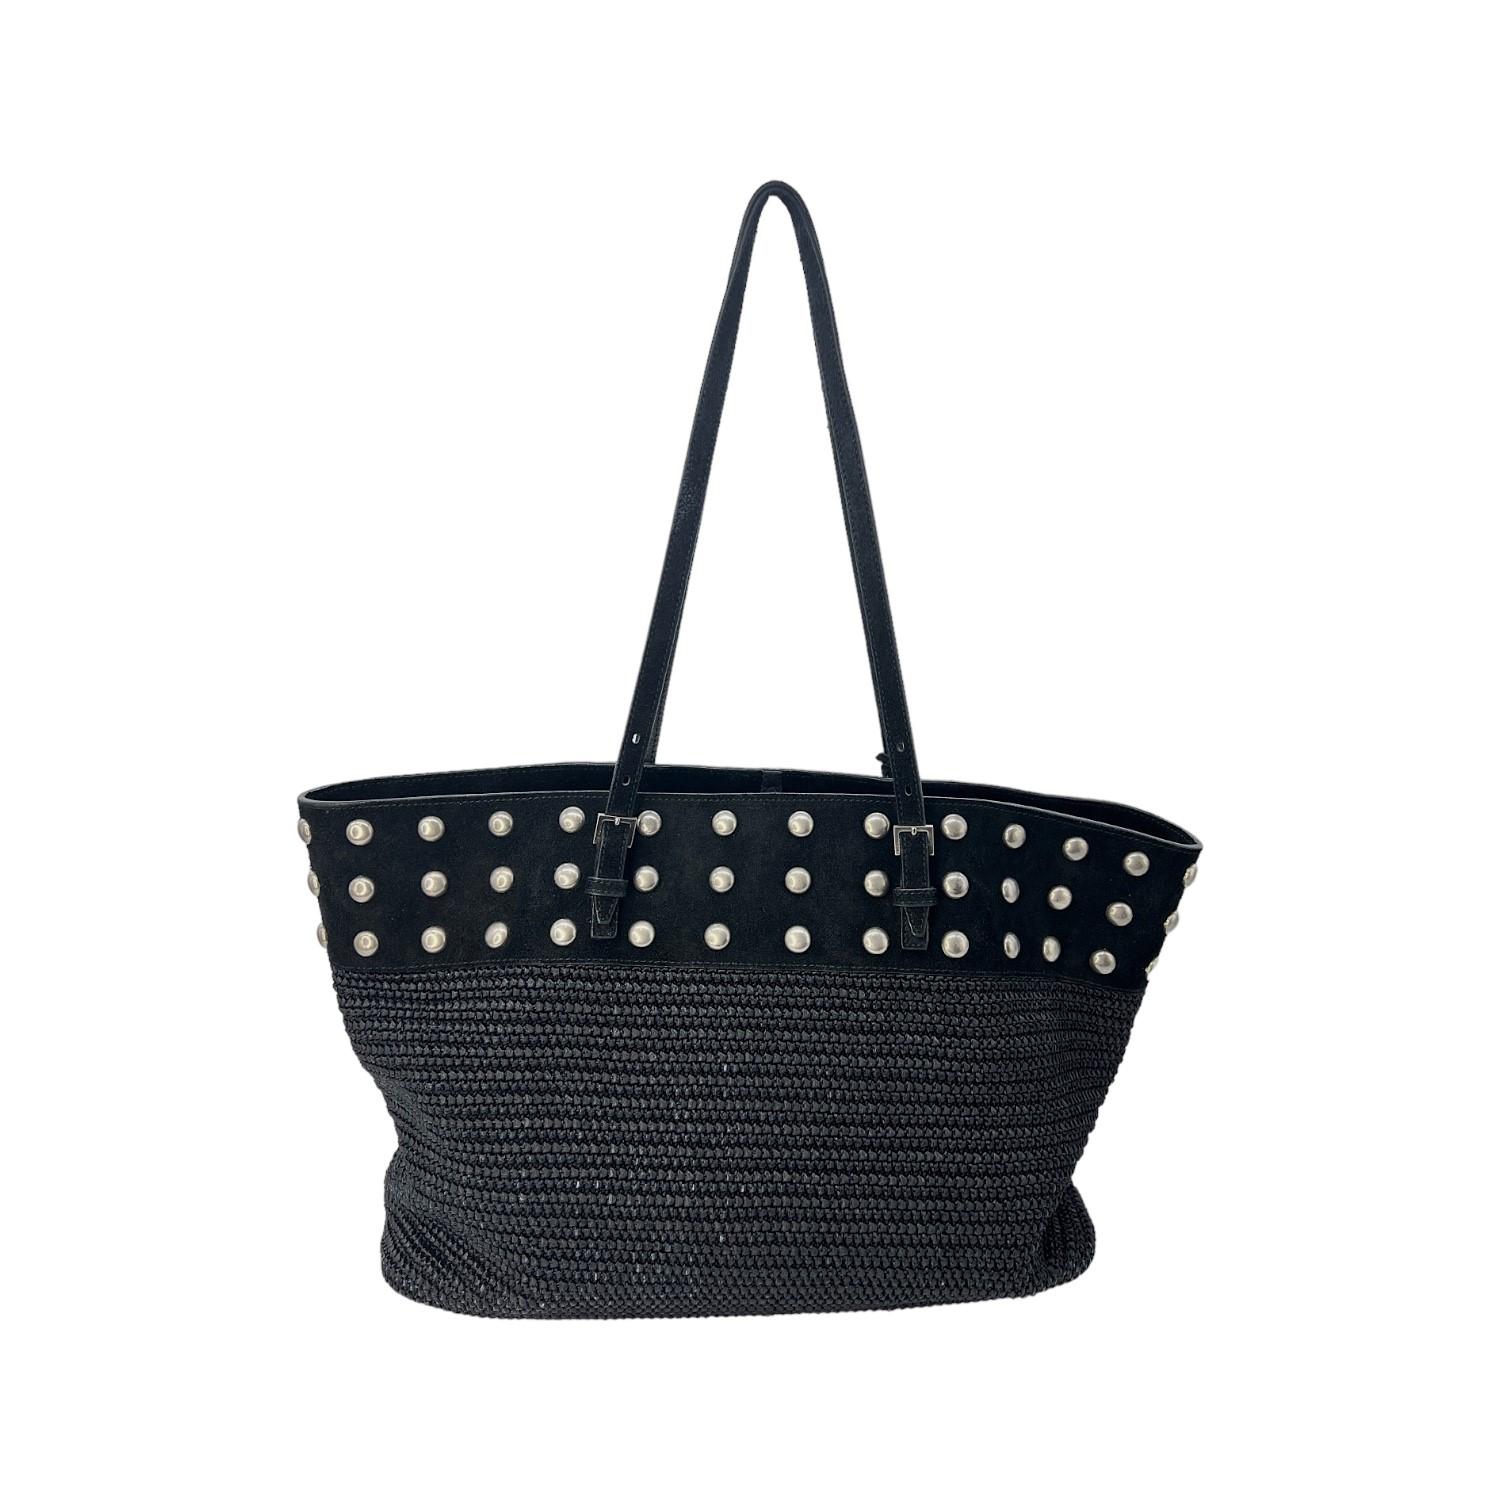 This Saint Laurent Boucle Studded Raffia Shopping Tote is finely crafted of a black suede, leather, and raffia fabric exterior with silver-tone hardware studs. It has dual flat shoulder straps. It has a buckle closure that opens up to a black fabric